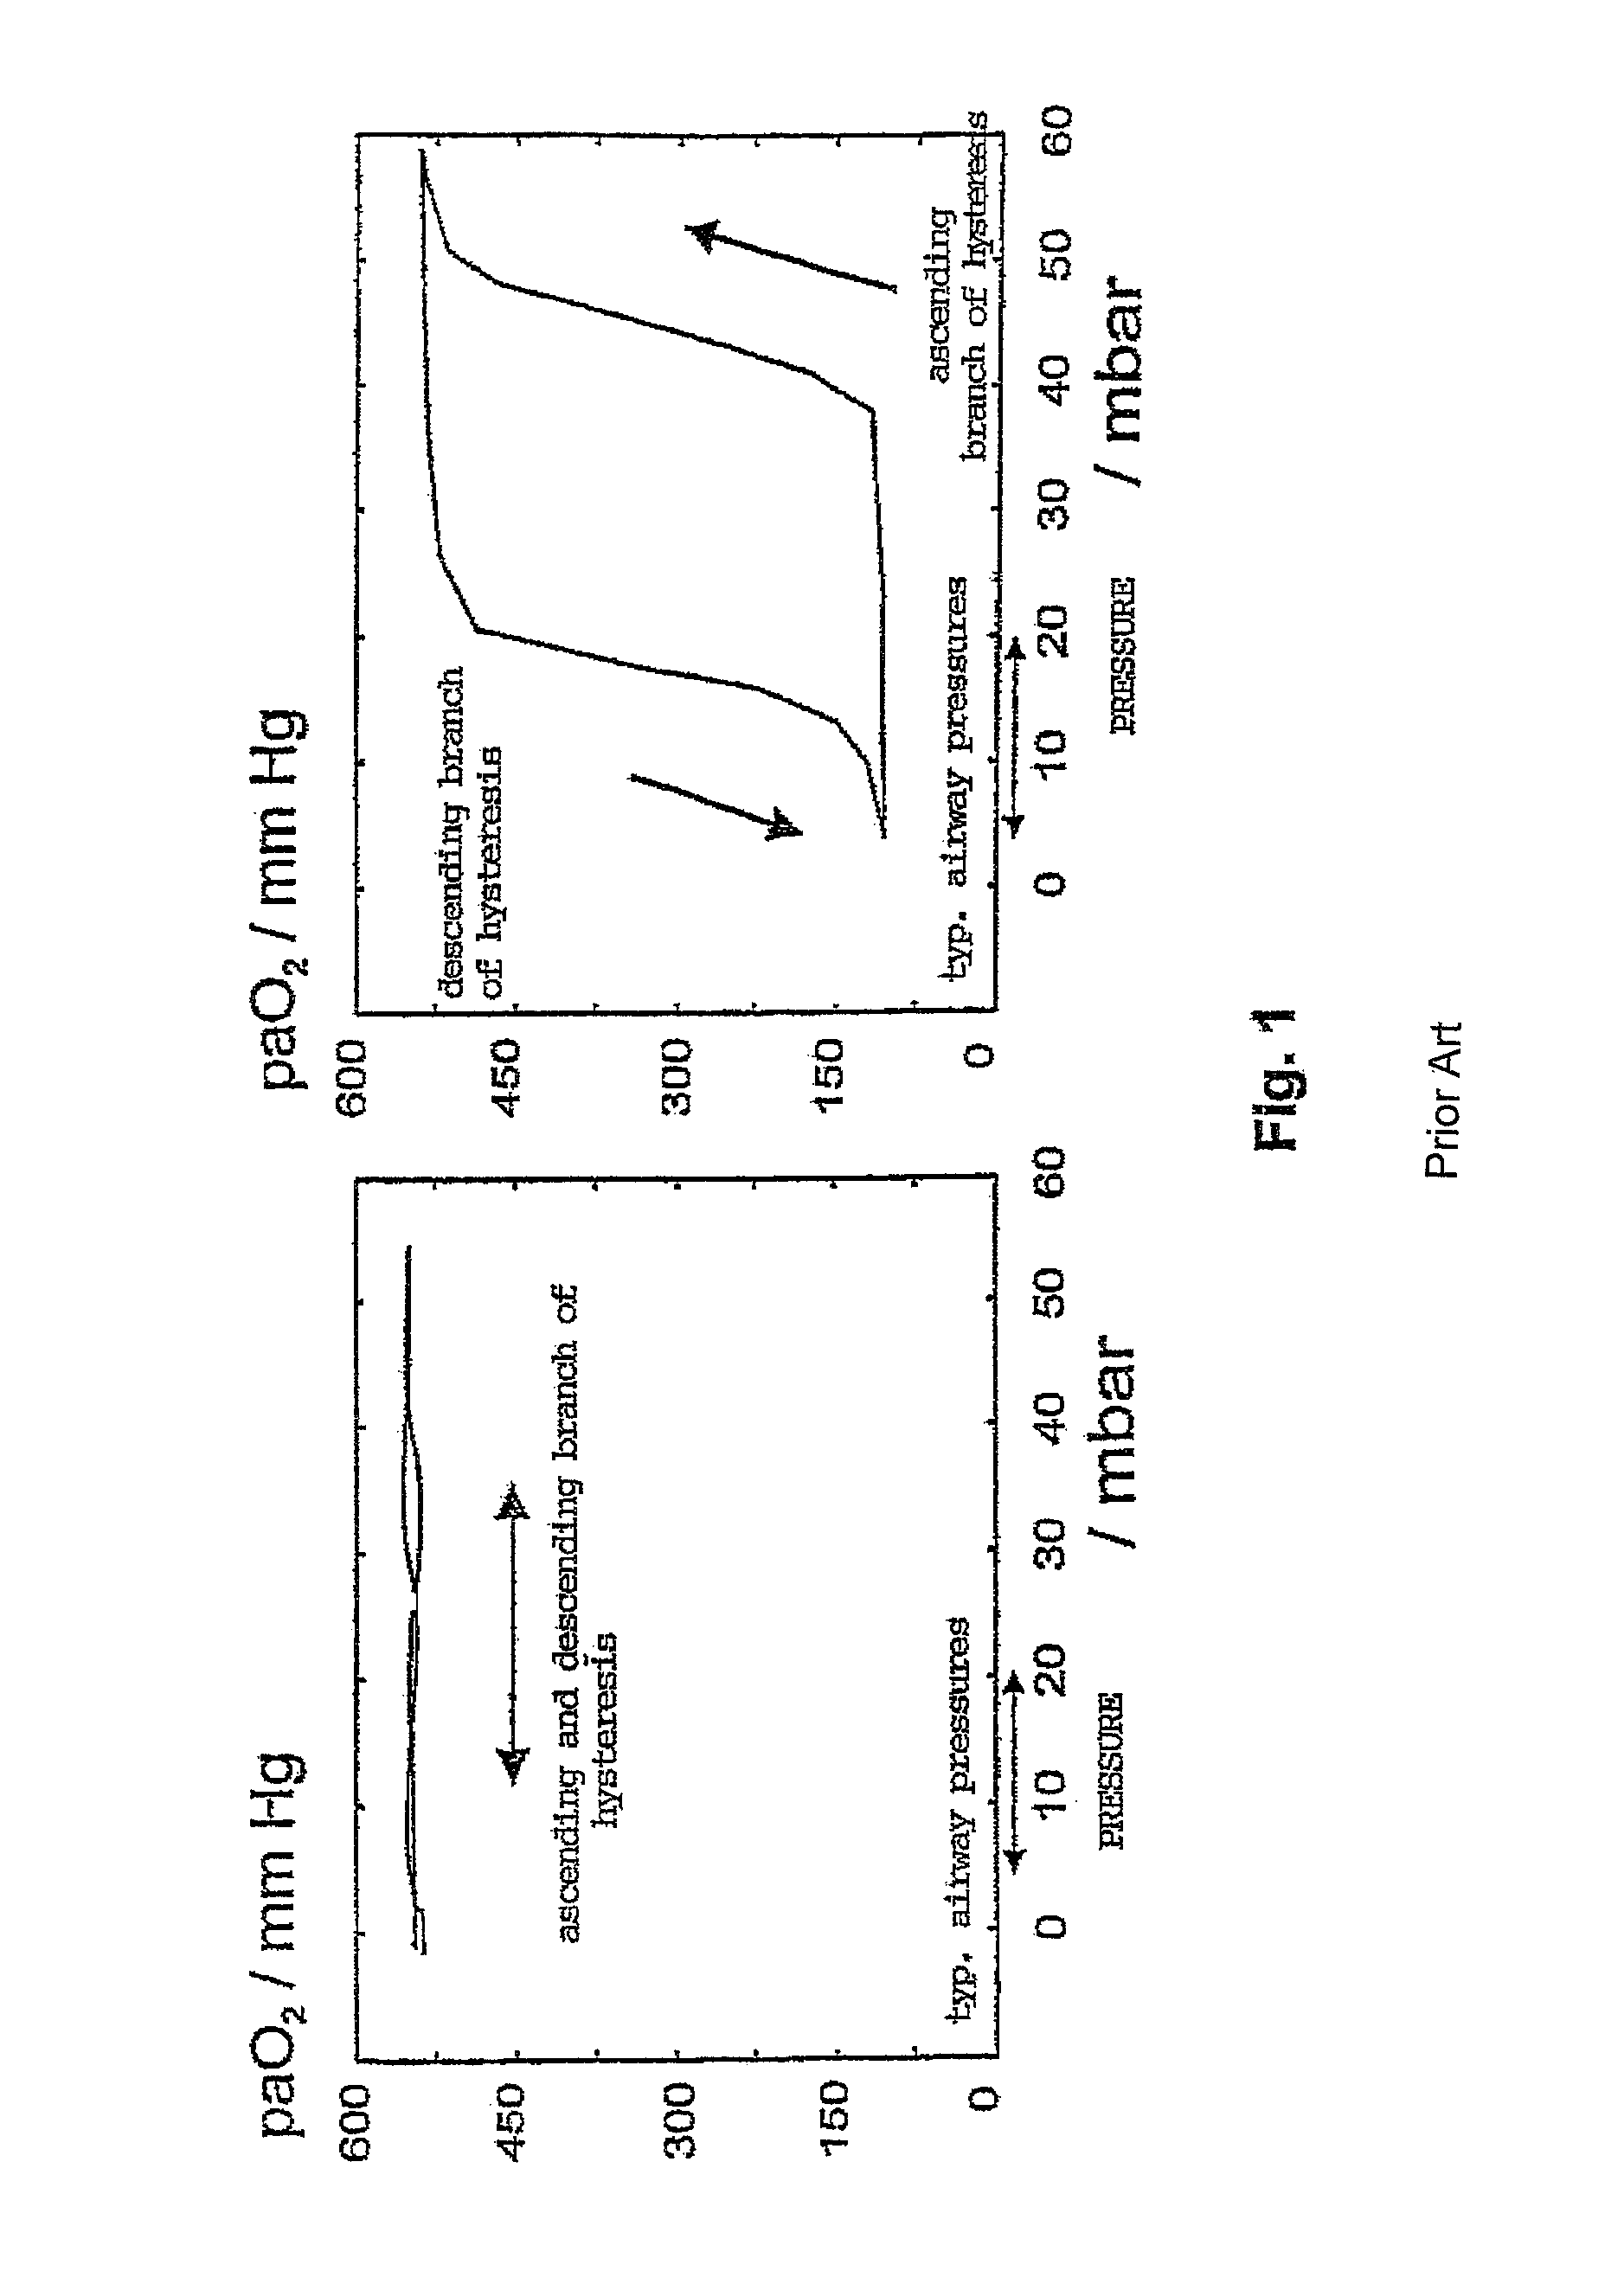 Non-invasive method and apparatus for optimizing the respiration of atelectatic lungs